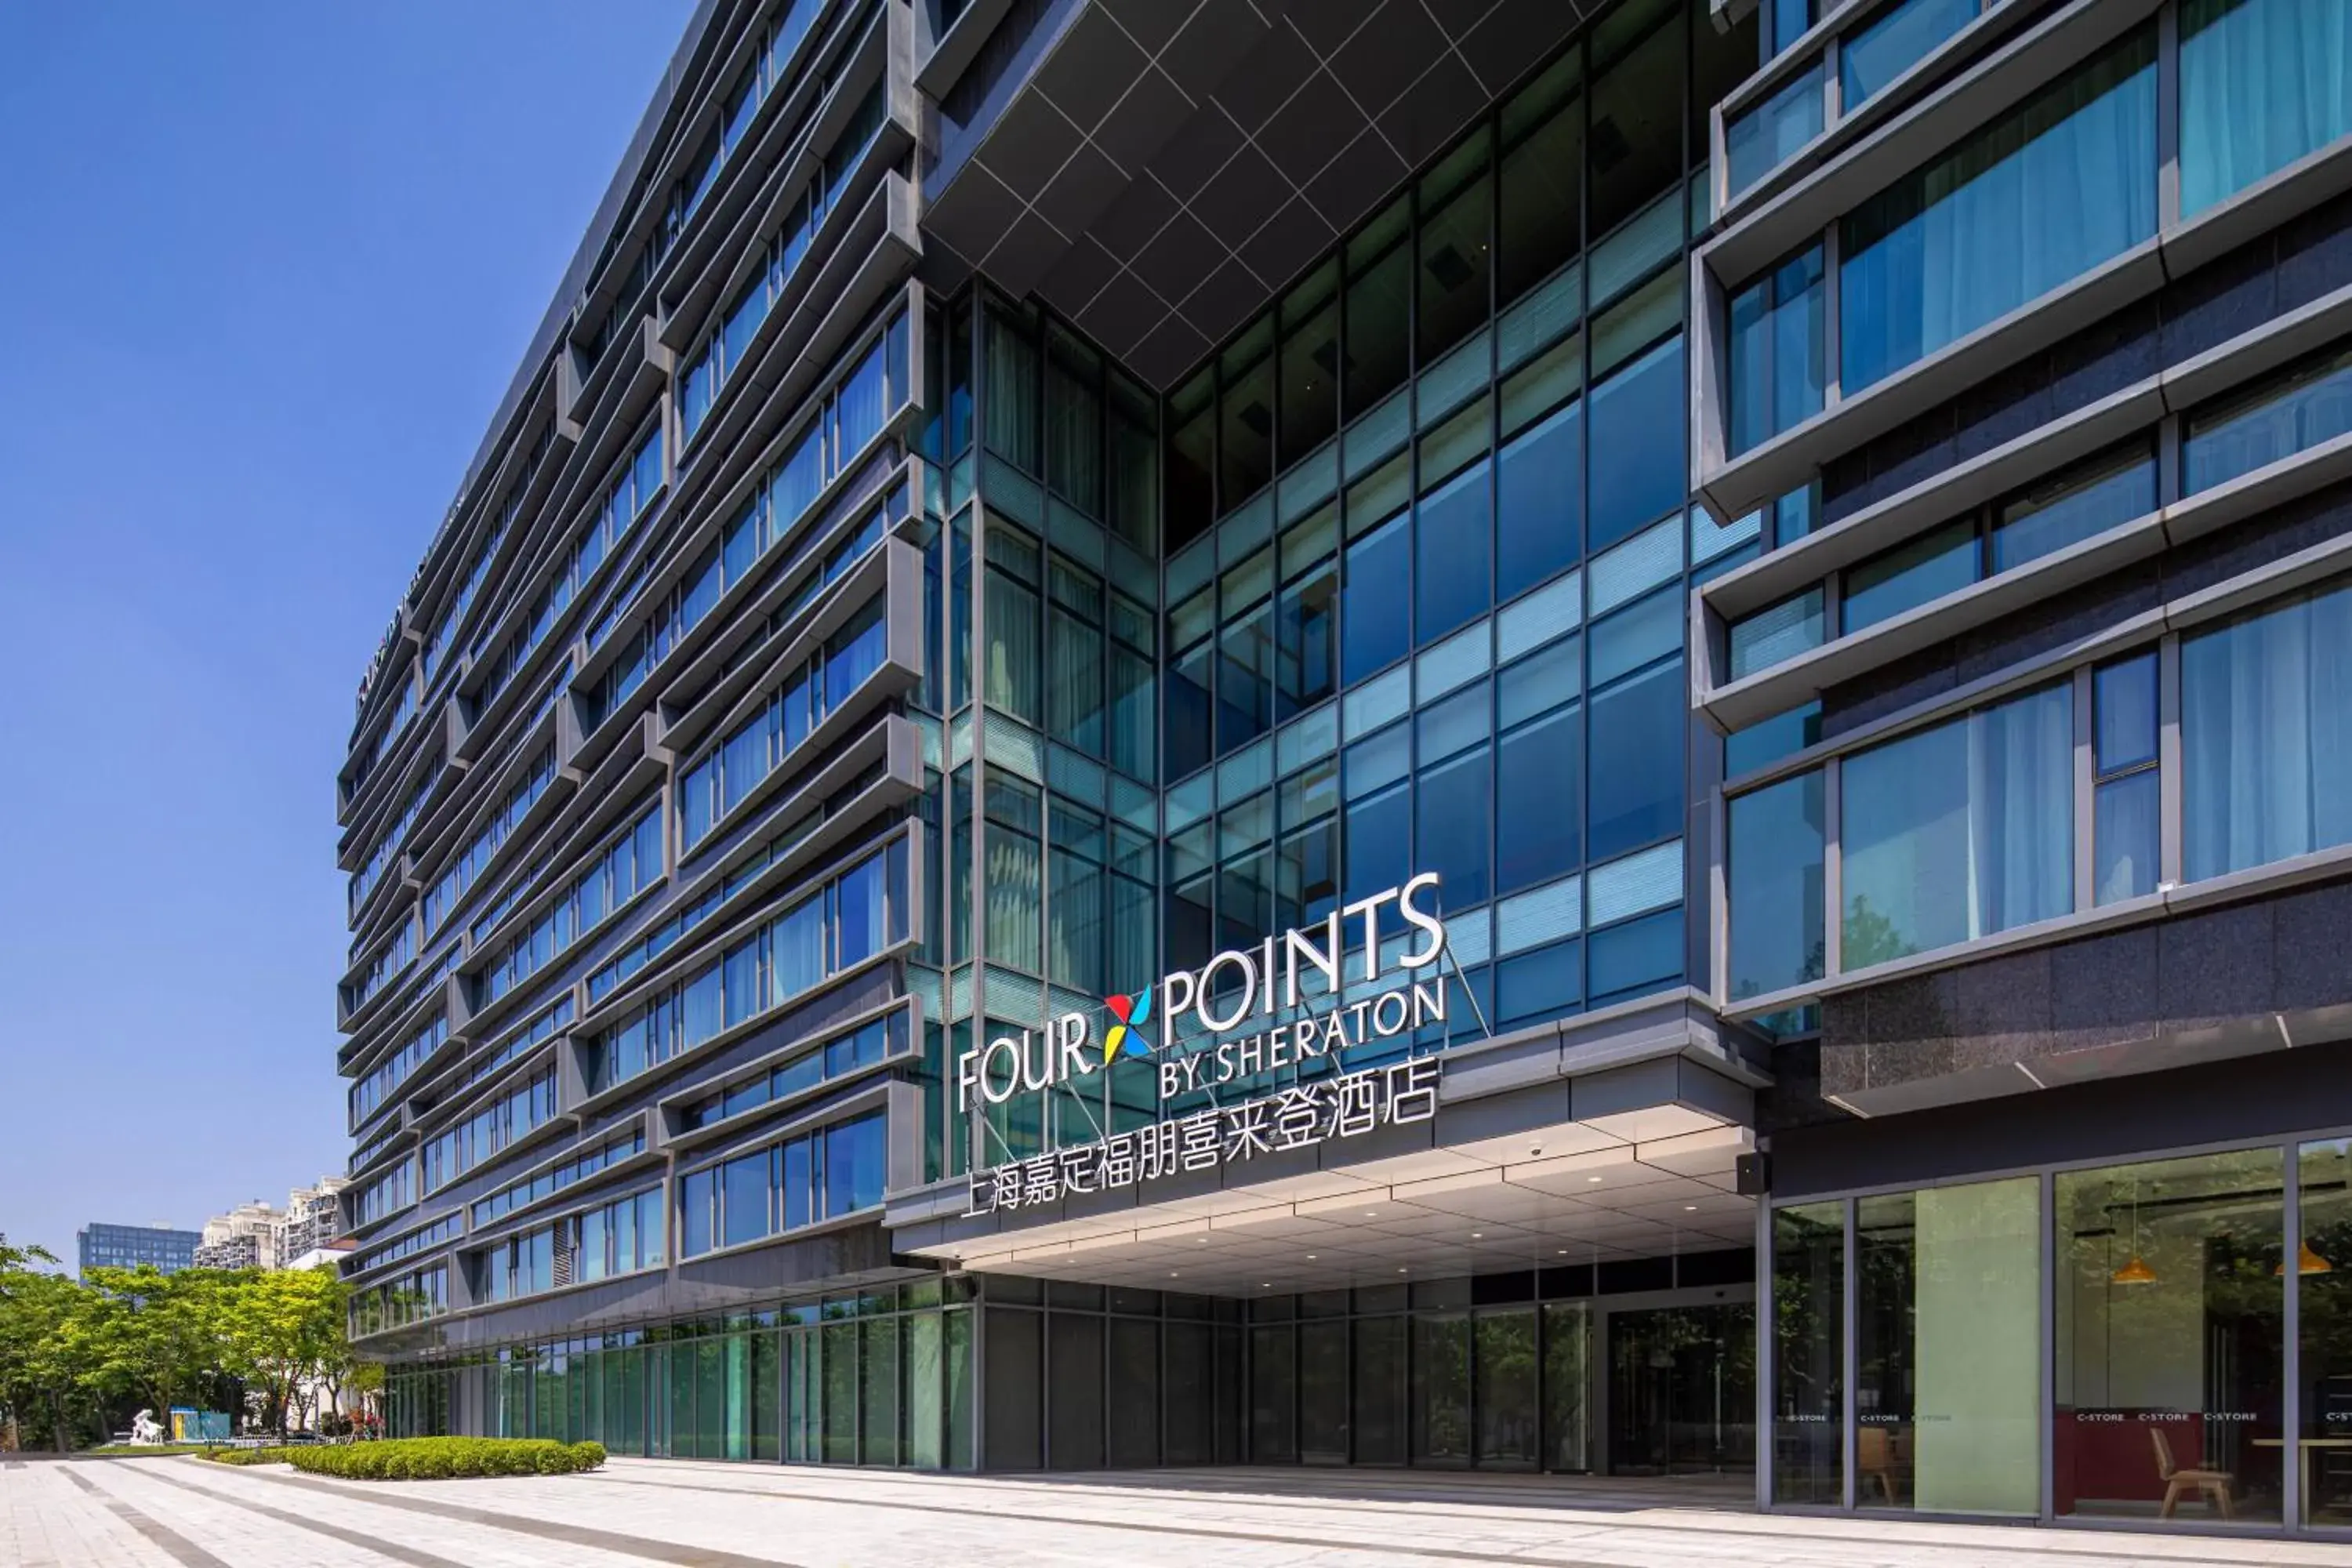 Property Building in Four Points by Sheraton Shanghai Jiading